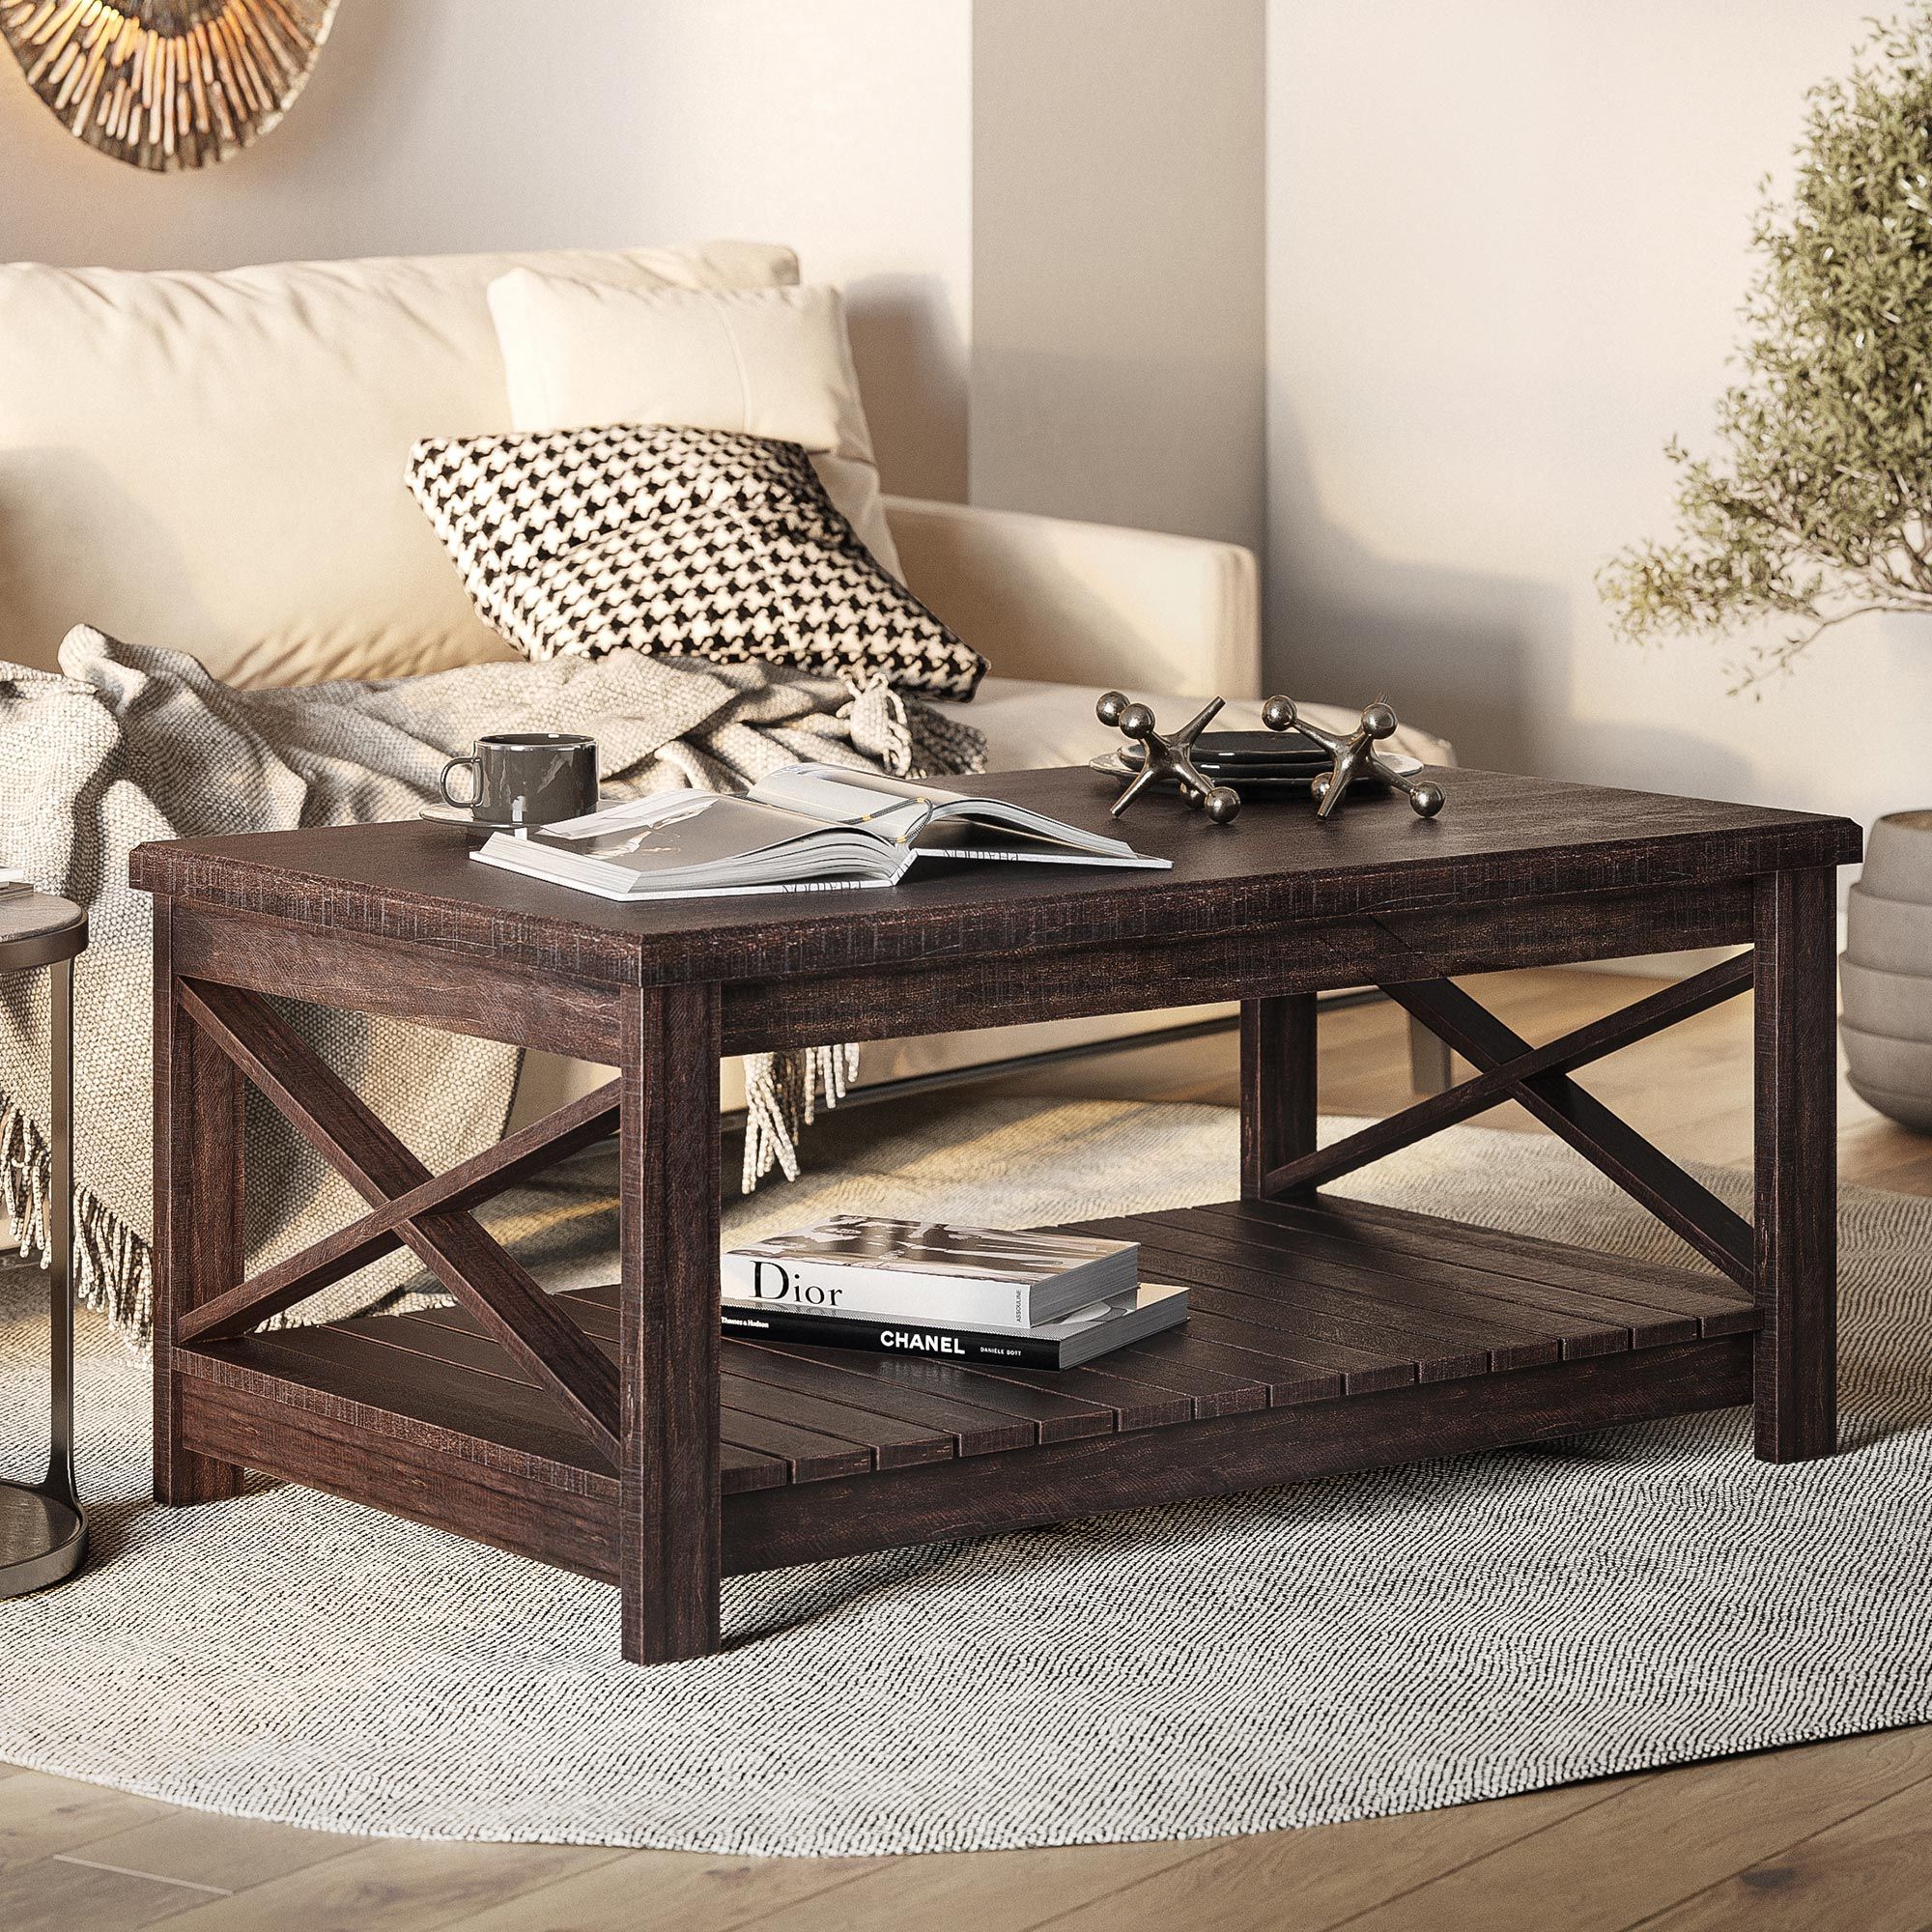 Modern Farmhouse Industrial Style Coffee Table With Storage Shelf, 2 Colors  | Ebay Inside Modern Farmhouse Coffee Table Sets (View 13 of 15)